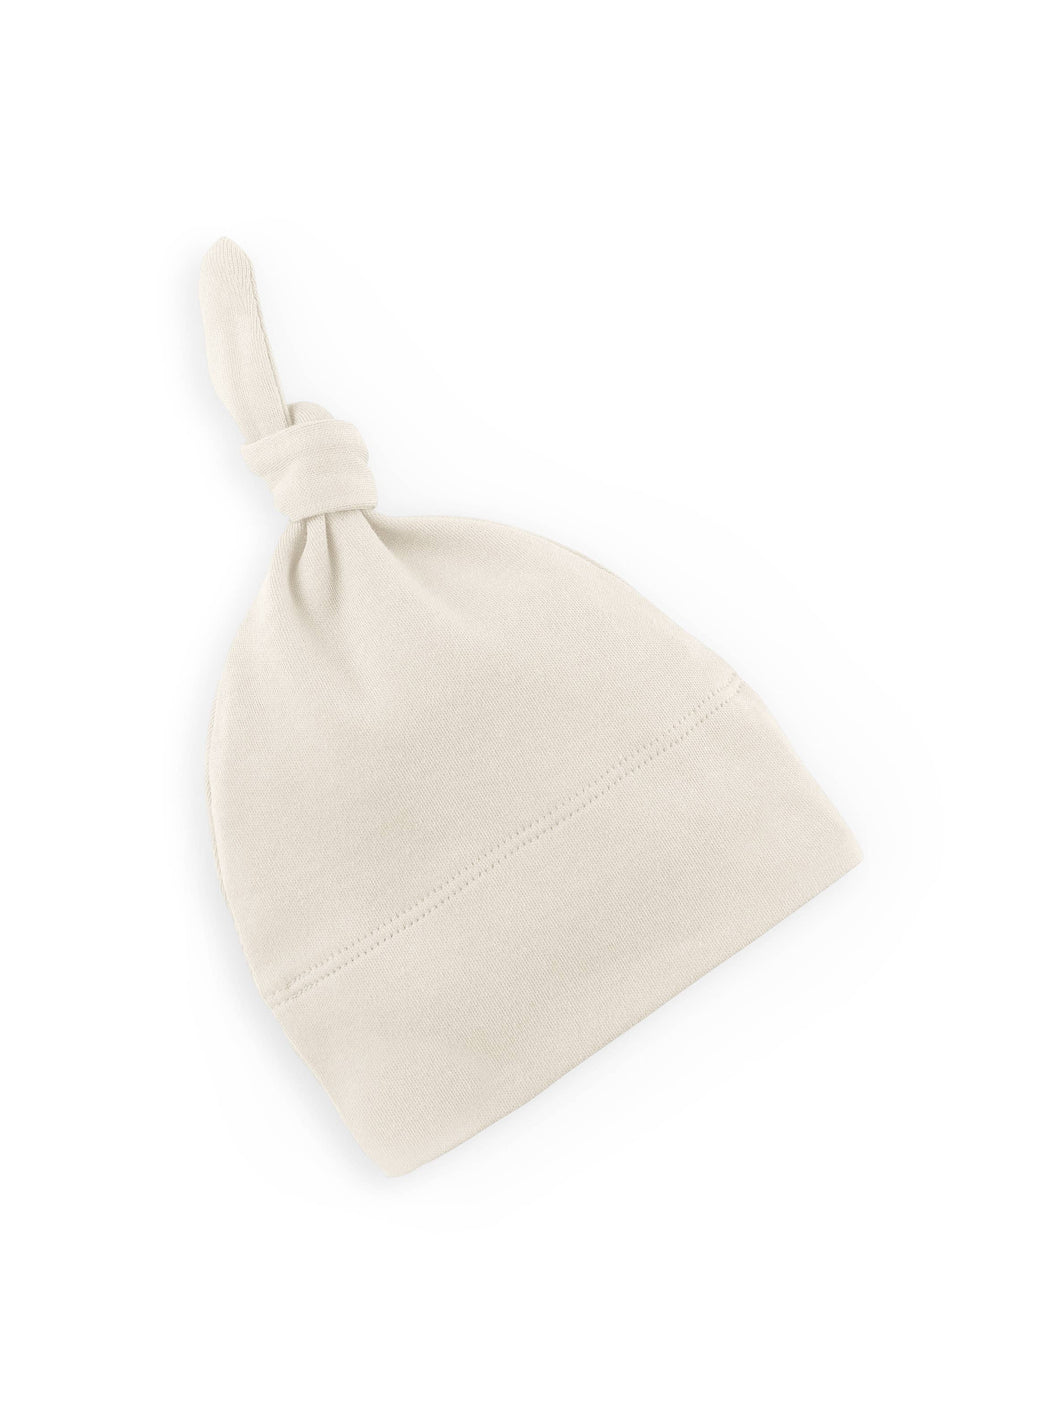 Organic Baby Classic Knotted Hat - Natural: NB